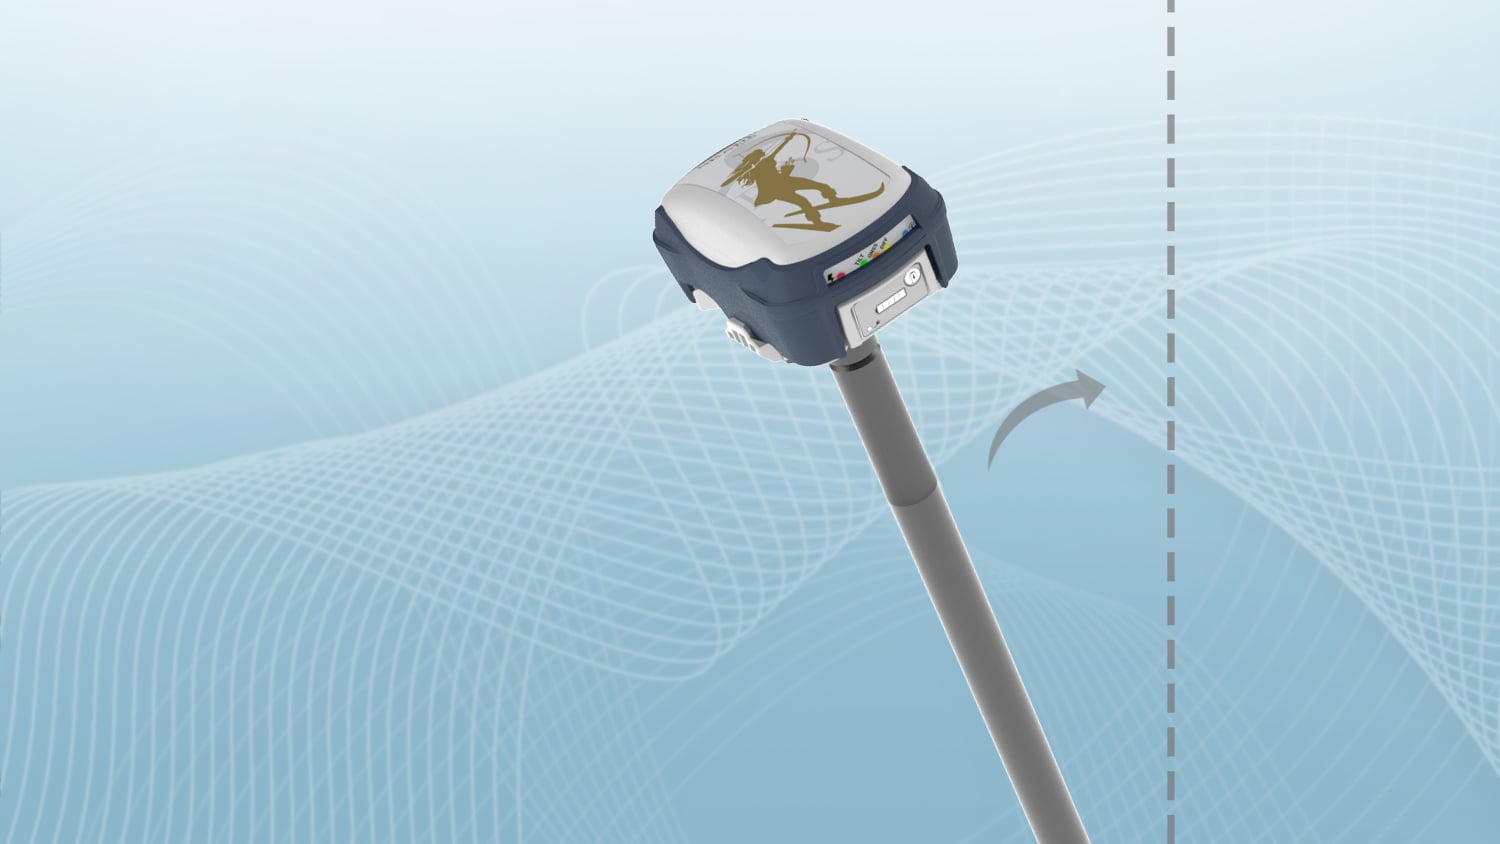 Tilt Compensation for Skadi Series High-Accuracy GNSS Receivers from Eos Positioning Systems